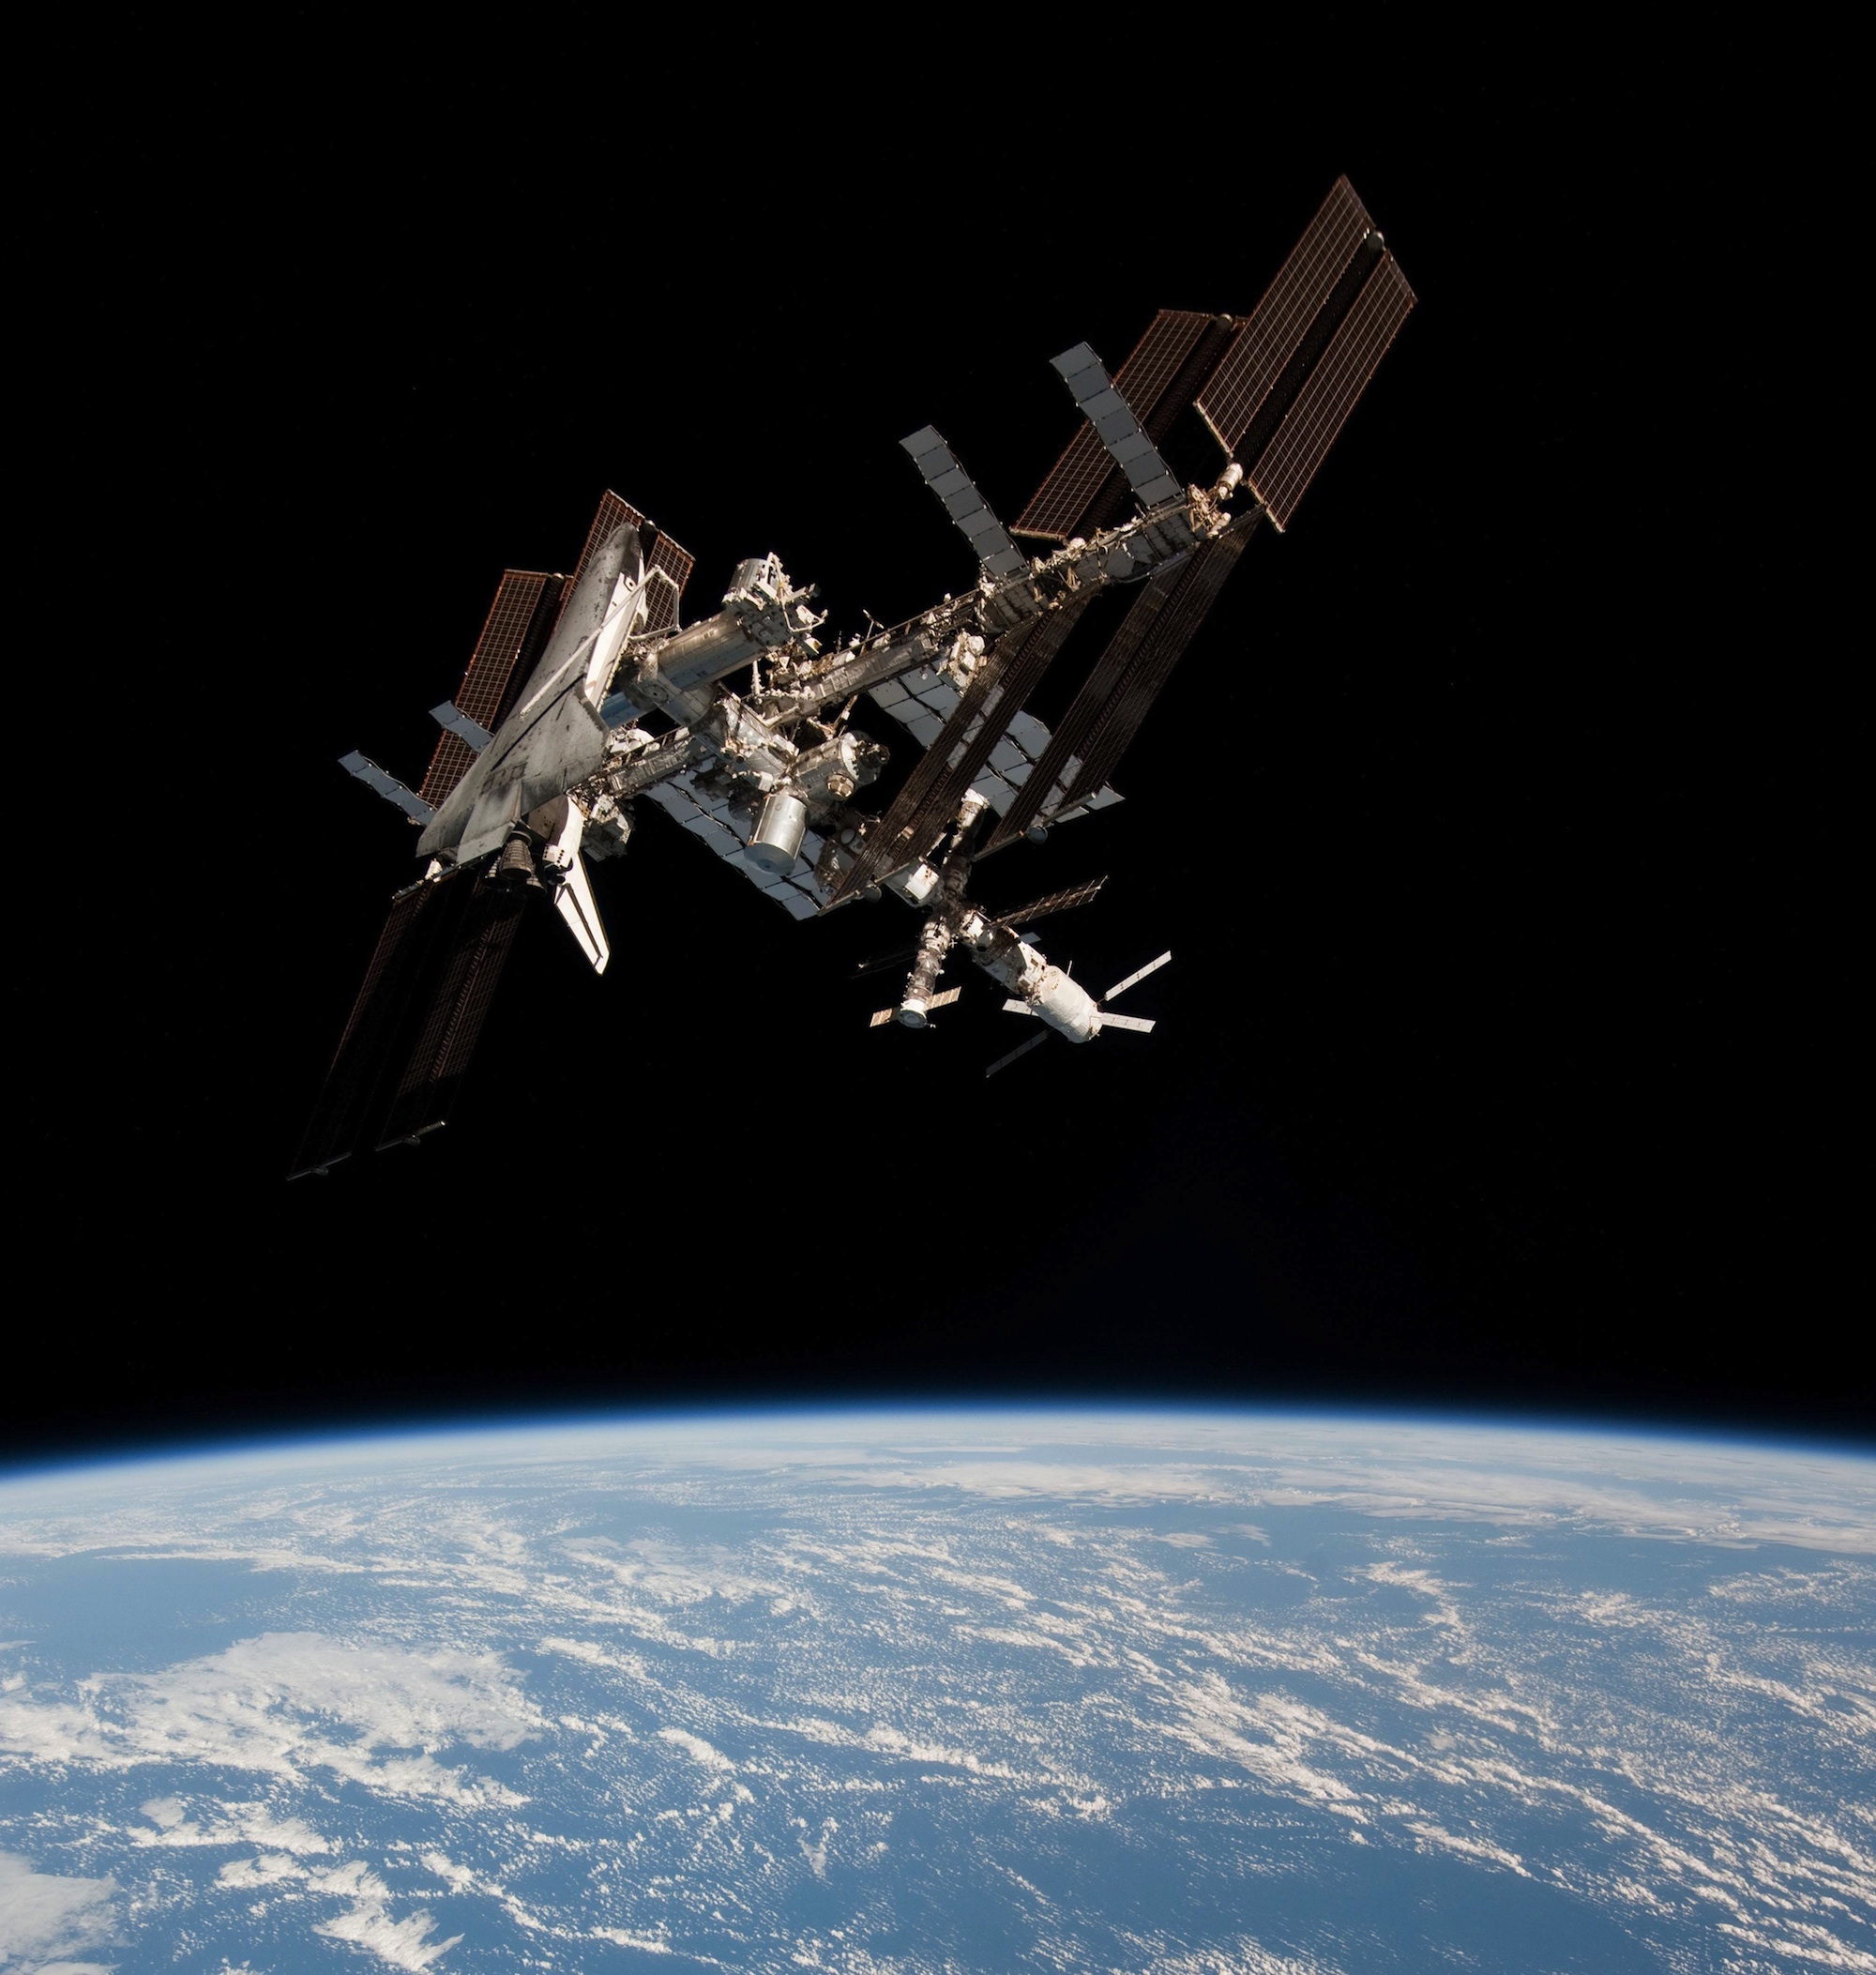 Endeavour (STS-134) docked to the International Space Station